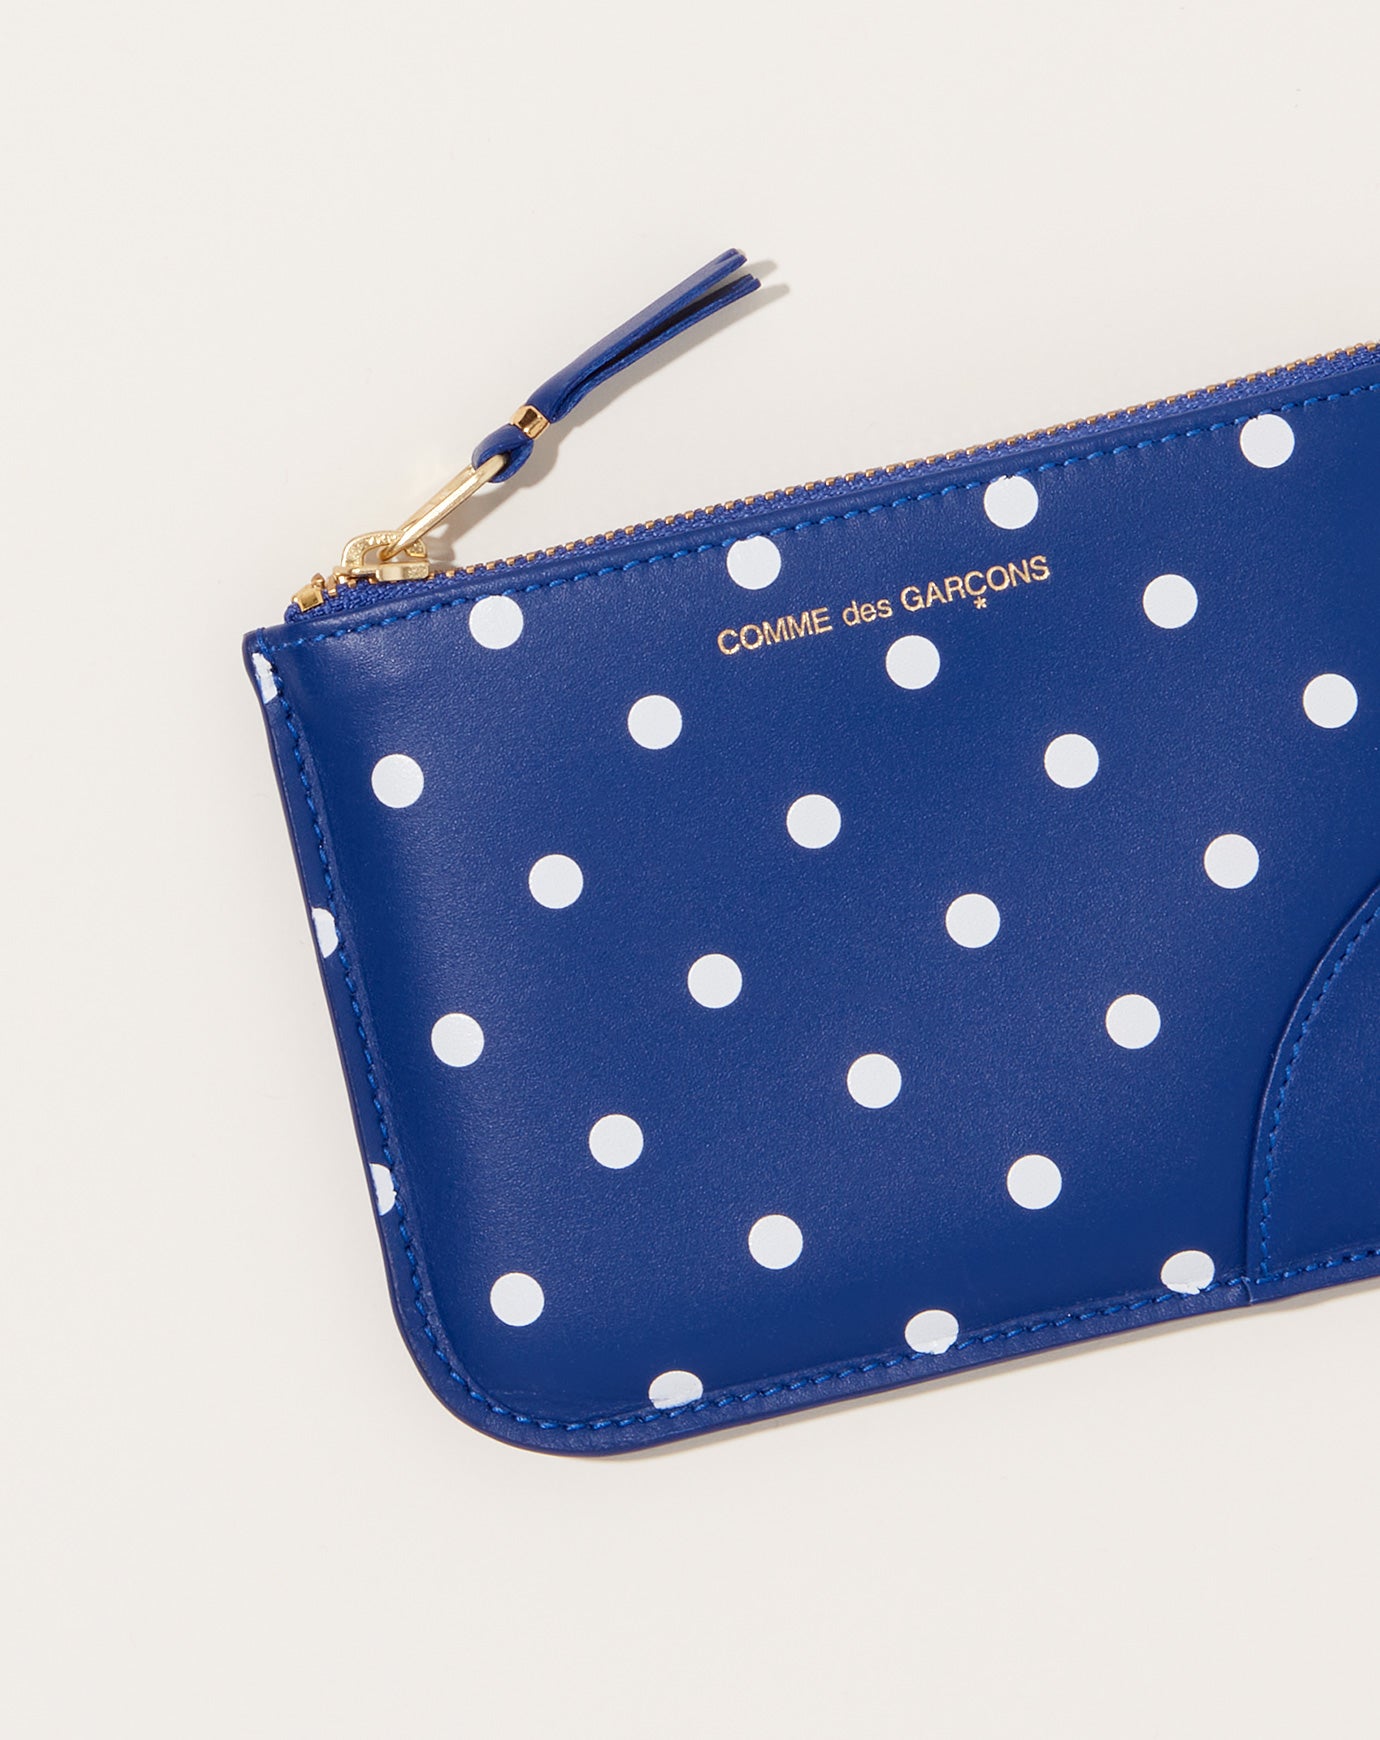 Comme des Garçons  Polka Dots Printed Pouch in Navy